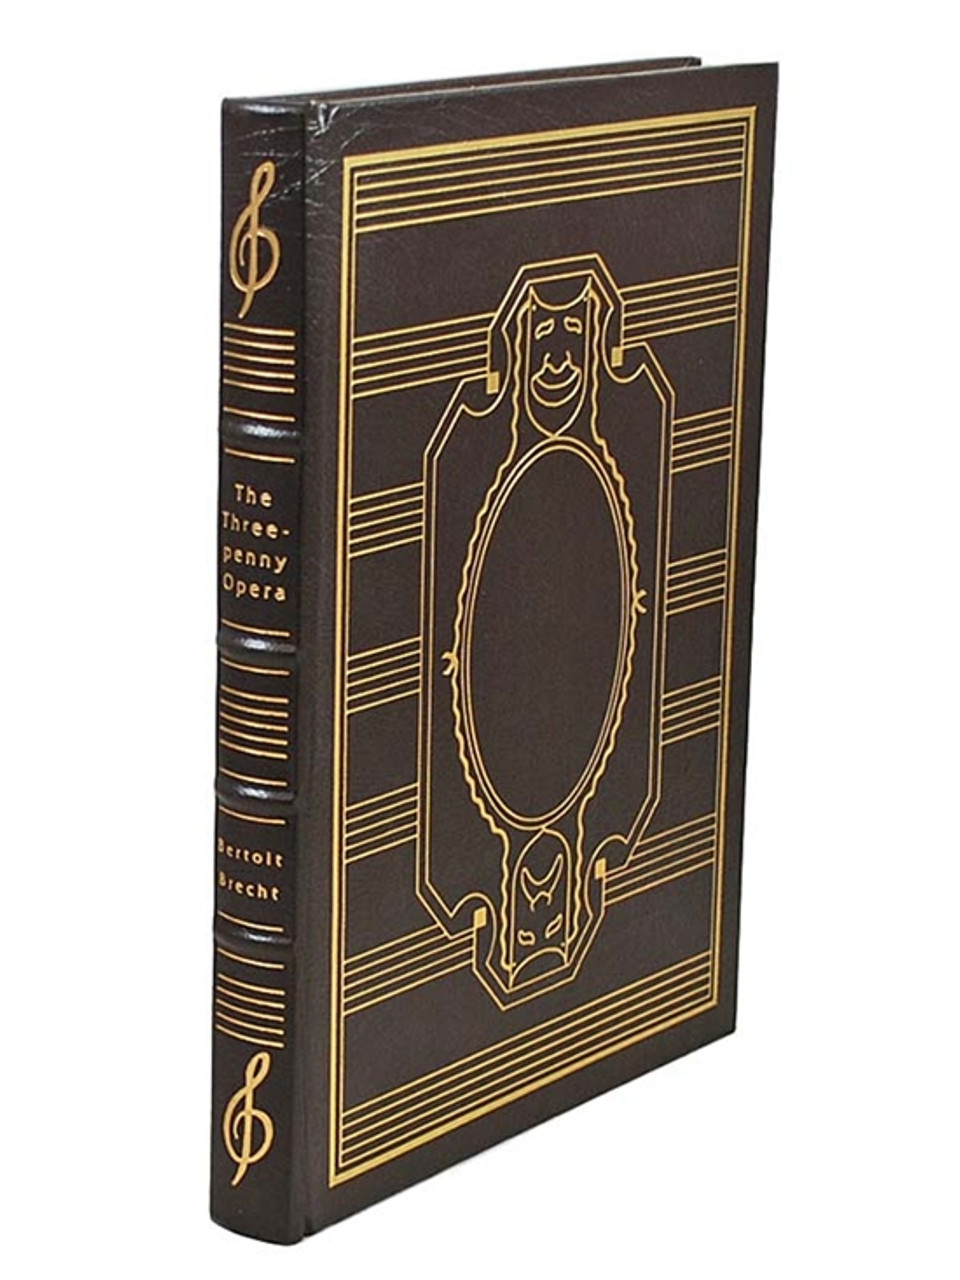 Easton Press "The Threepenny Opera" Bertolt Brecht, Leather Bound Collector's Edition [Very Fine]